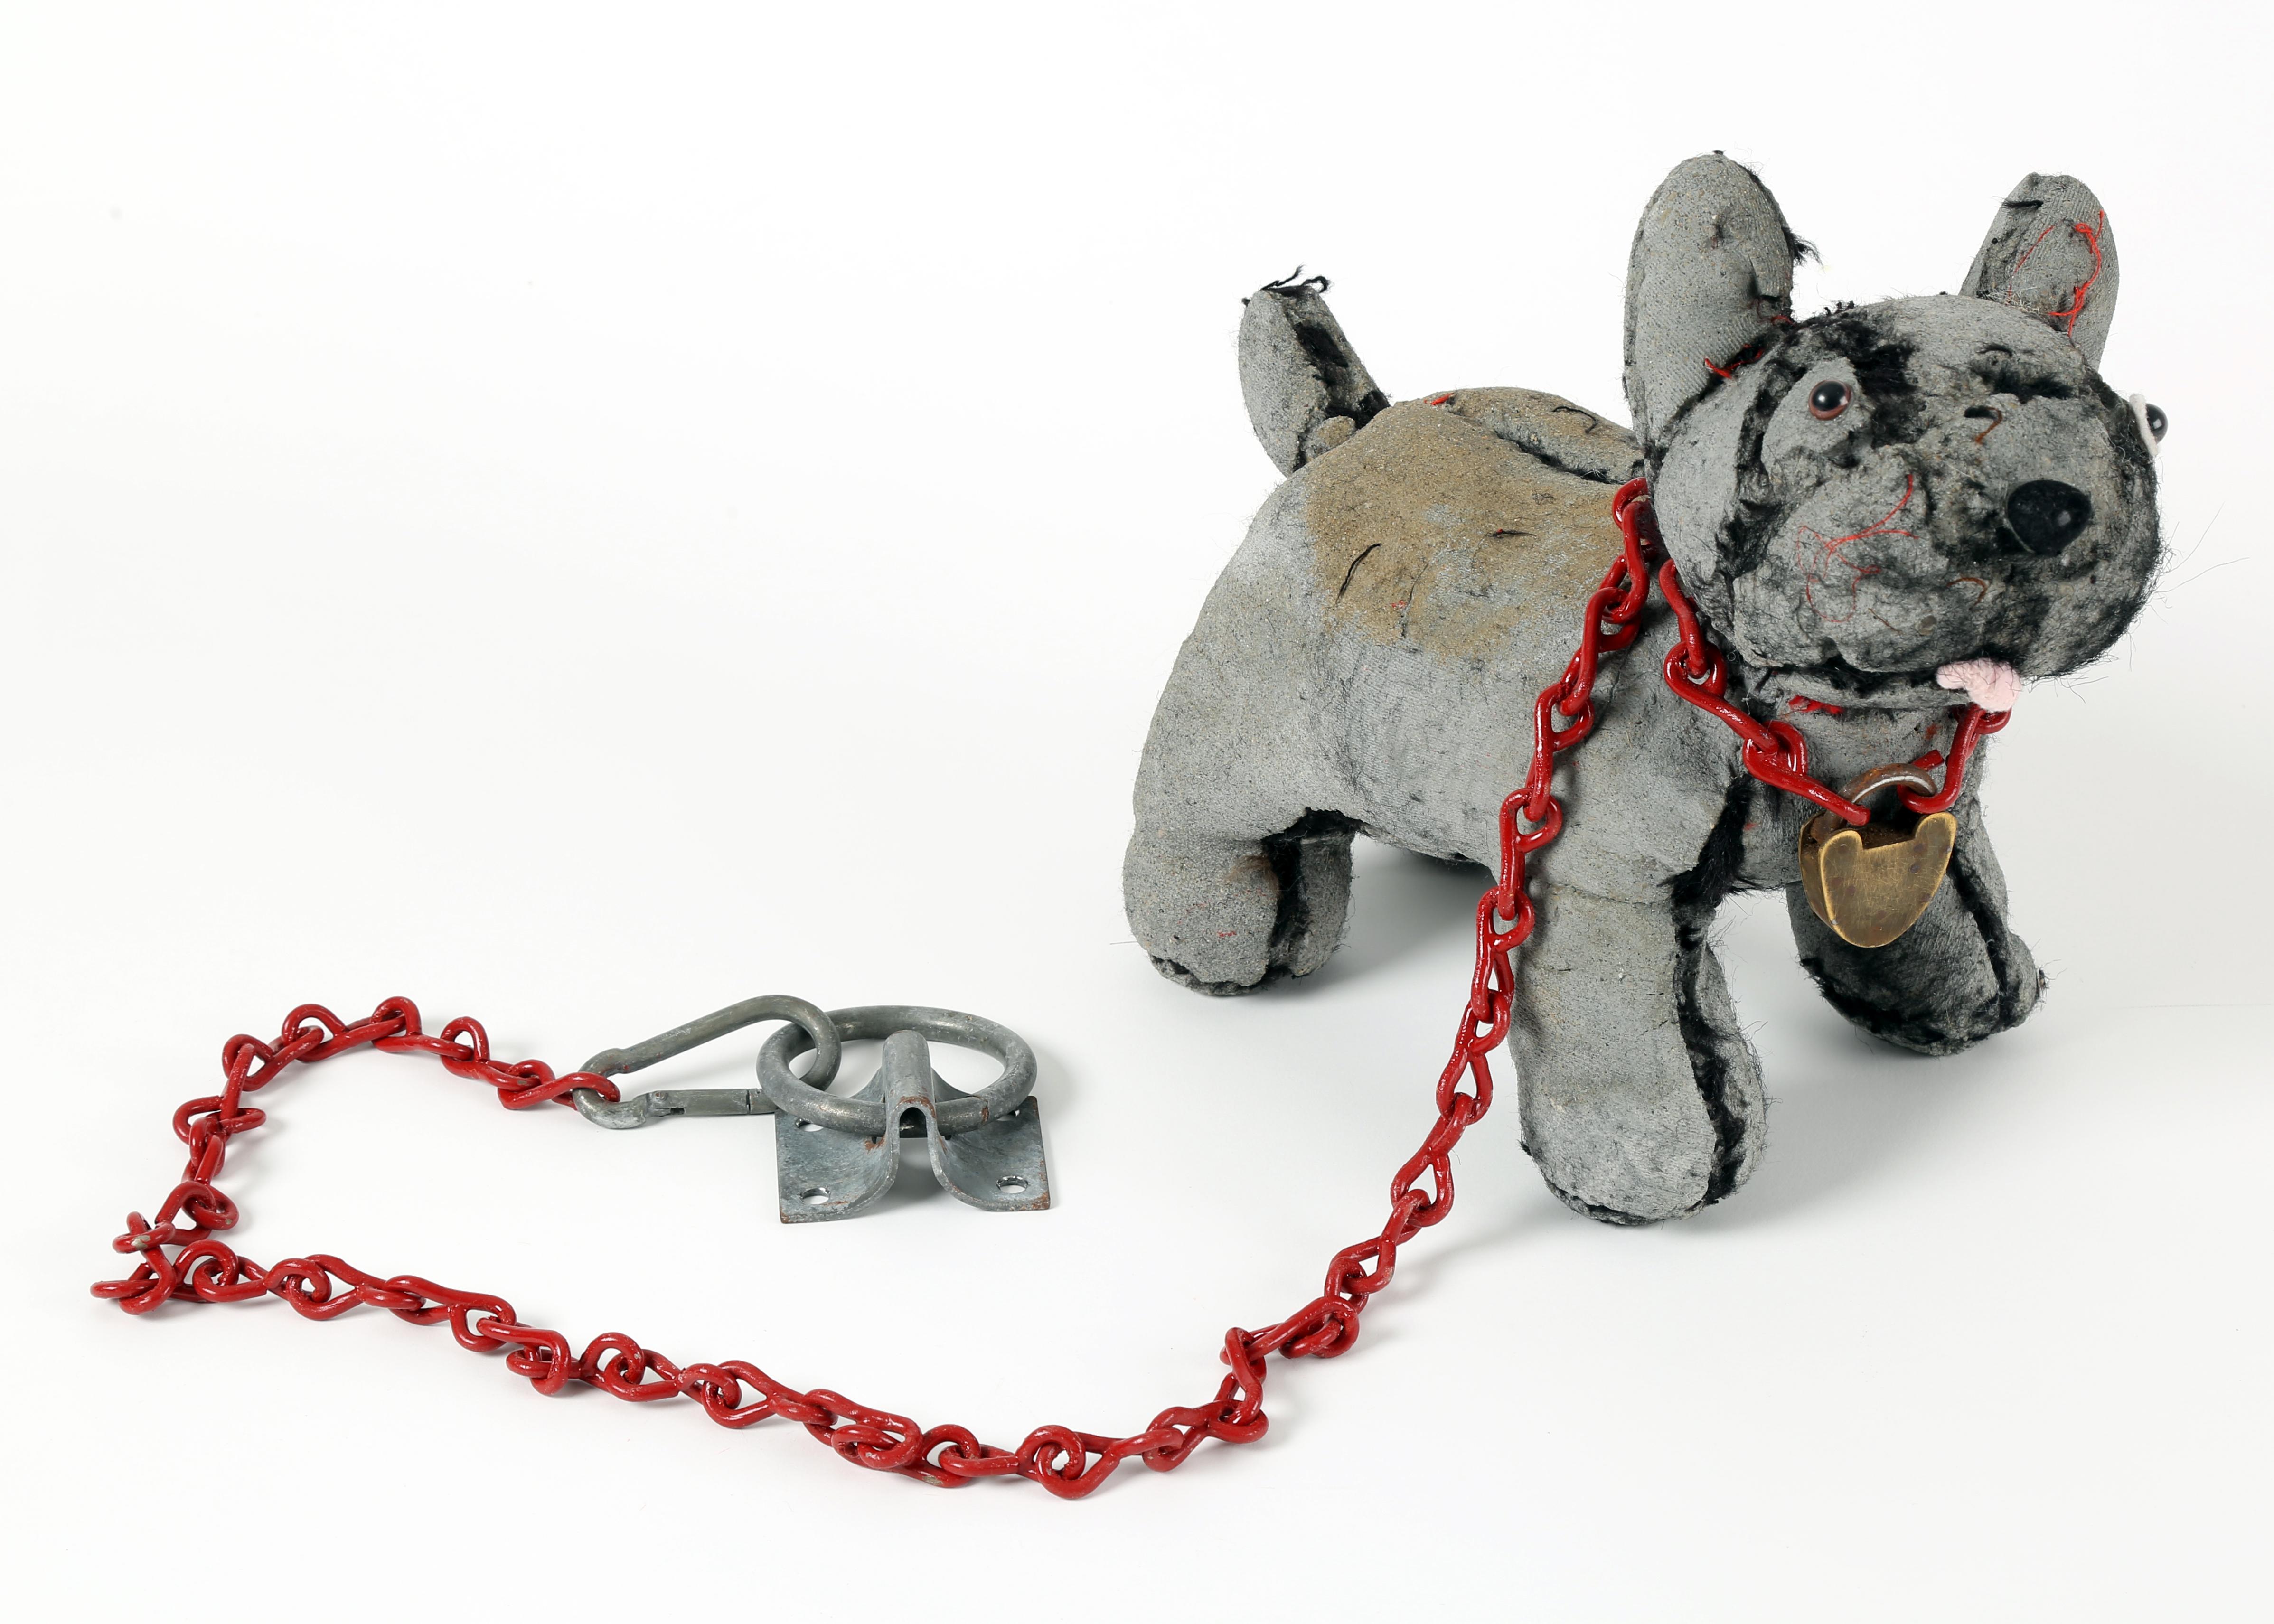 Ross Bonfanti Figurative Sculpture - Terrier with Red Chain